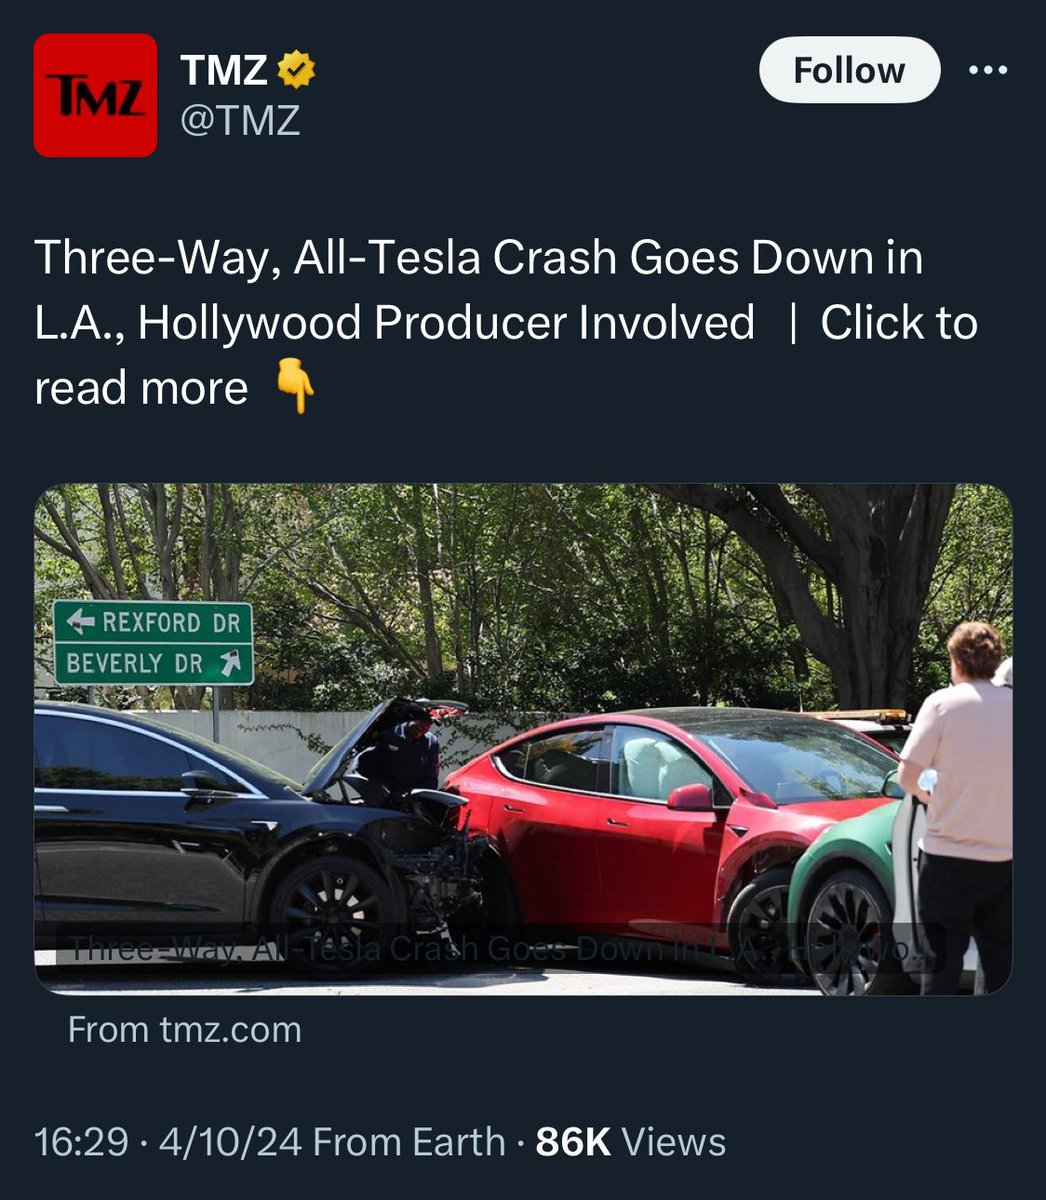 What are the odds of three Teslas crashing into each other again? Pretty, pretty good considering who buys Teslas and how accident prone these vehicles are…expect to hear of more $TSLA crashes as more take Musk up on his free trial offer for perpetually defective FSD Beta 😂